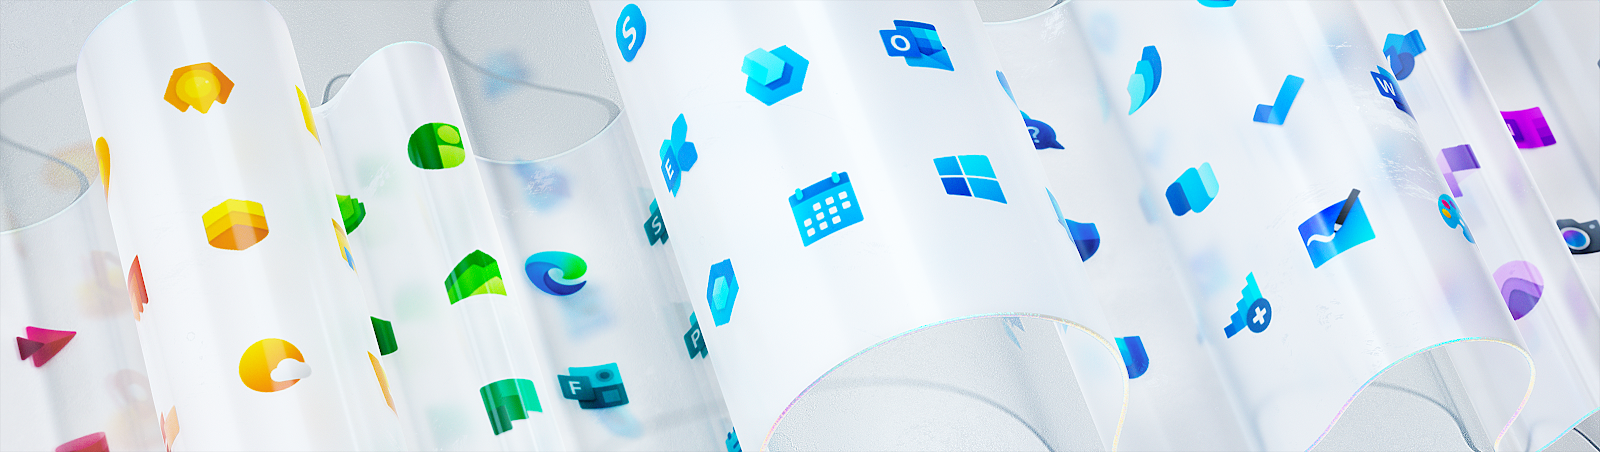 Microsoft distribuisce le rinnovate icone in Windows 10